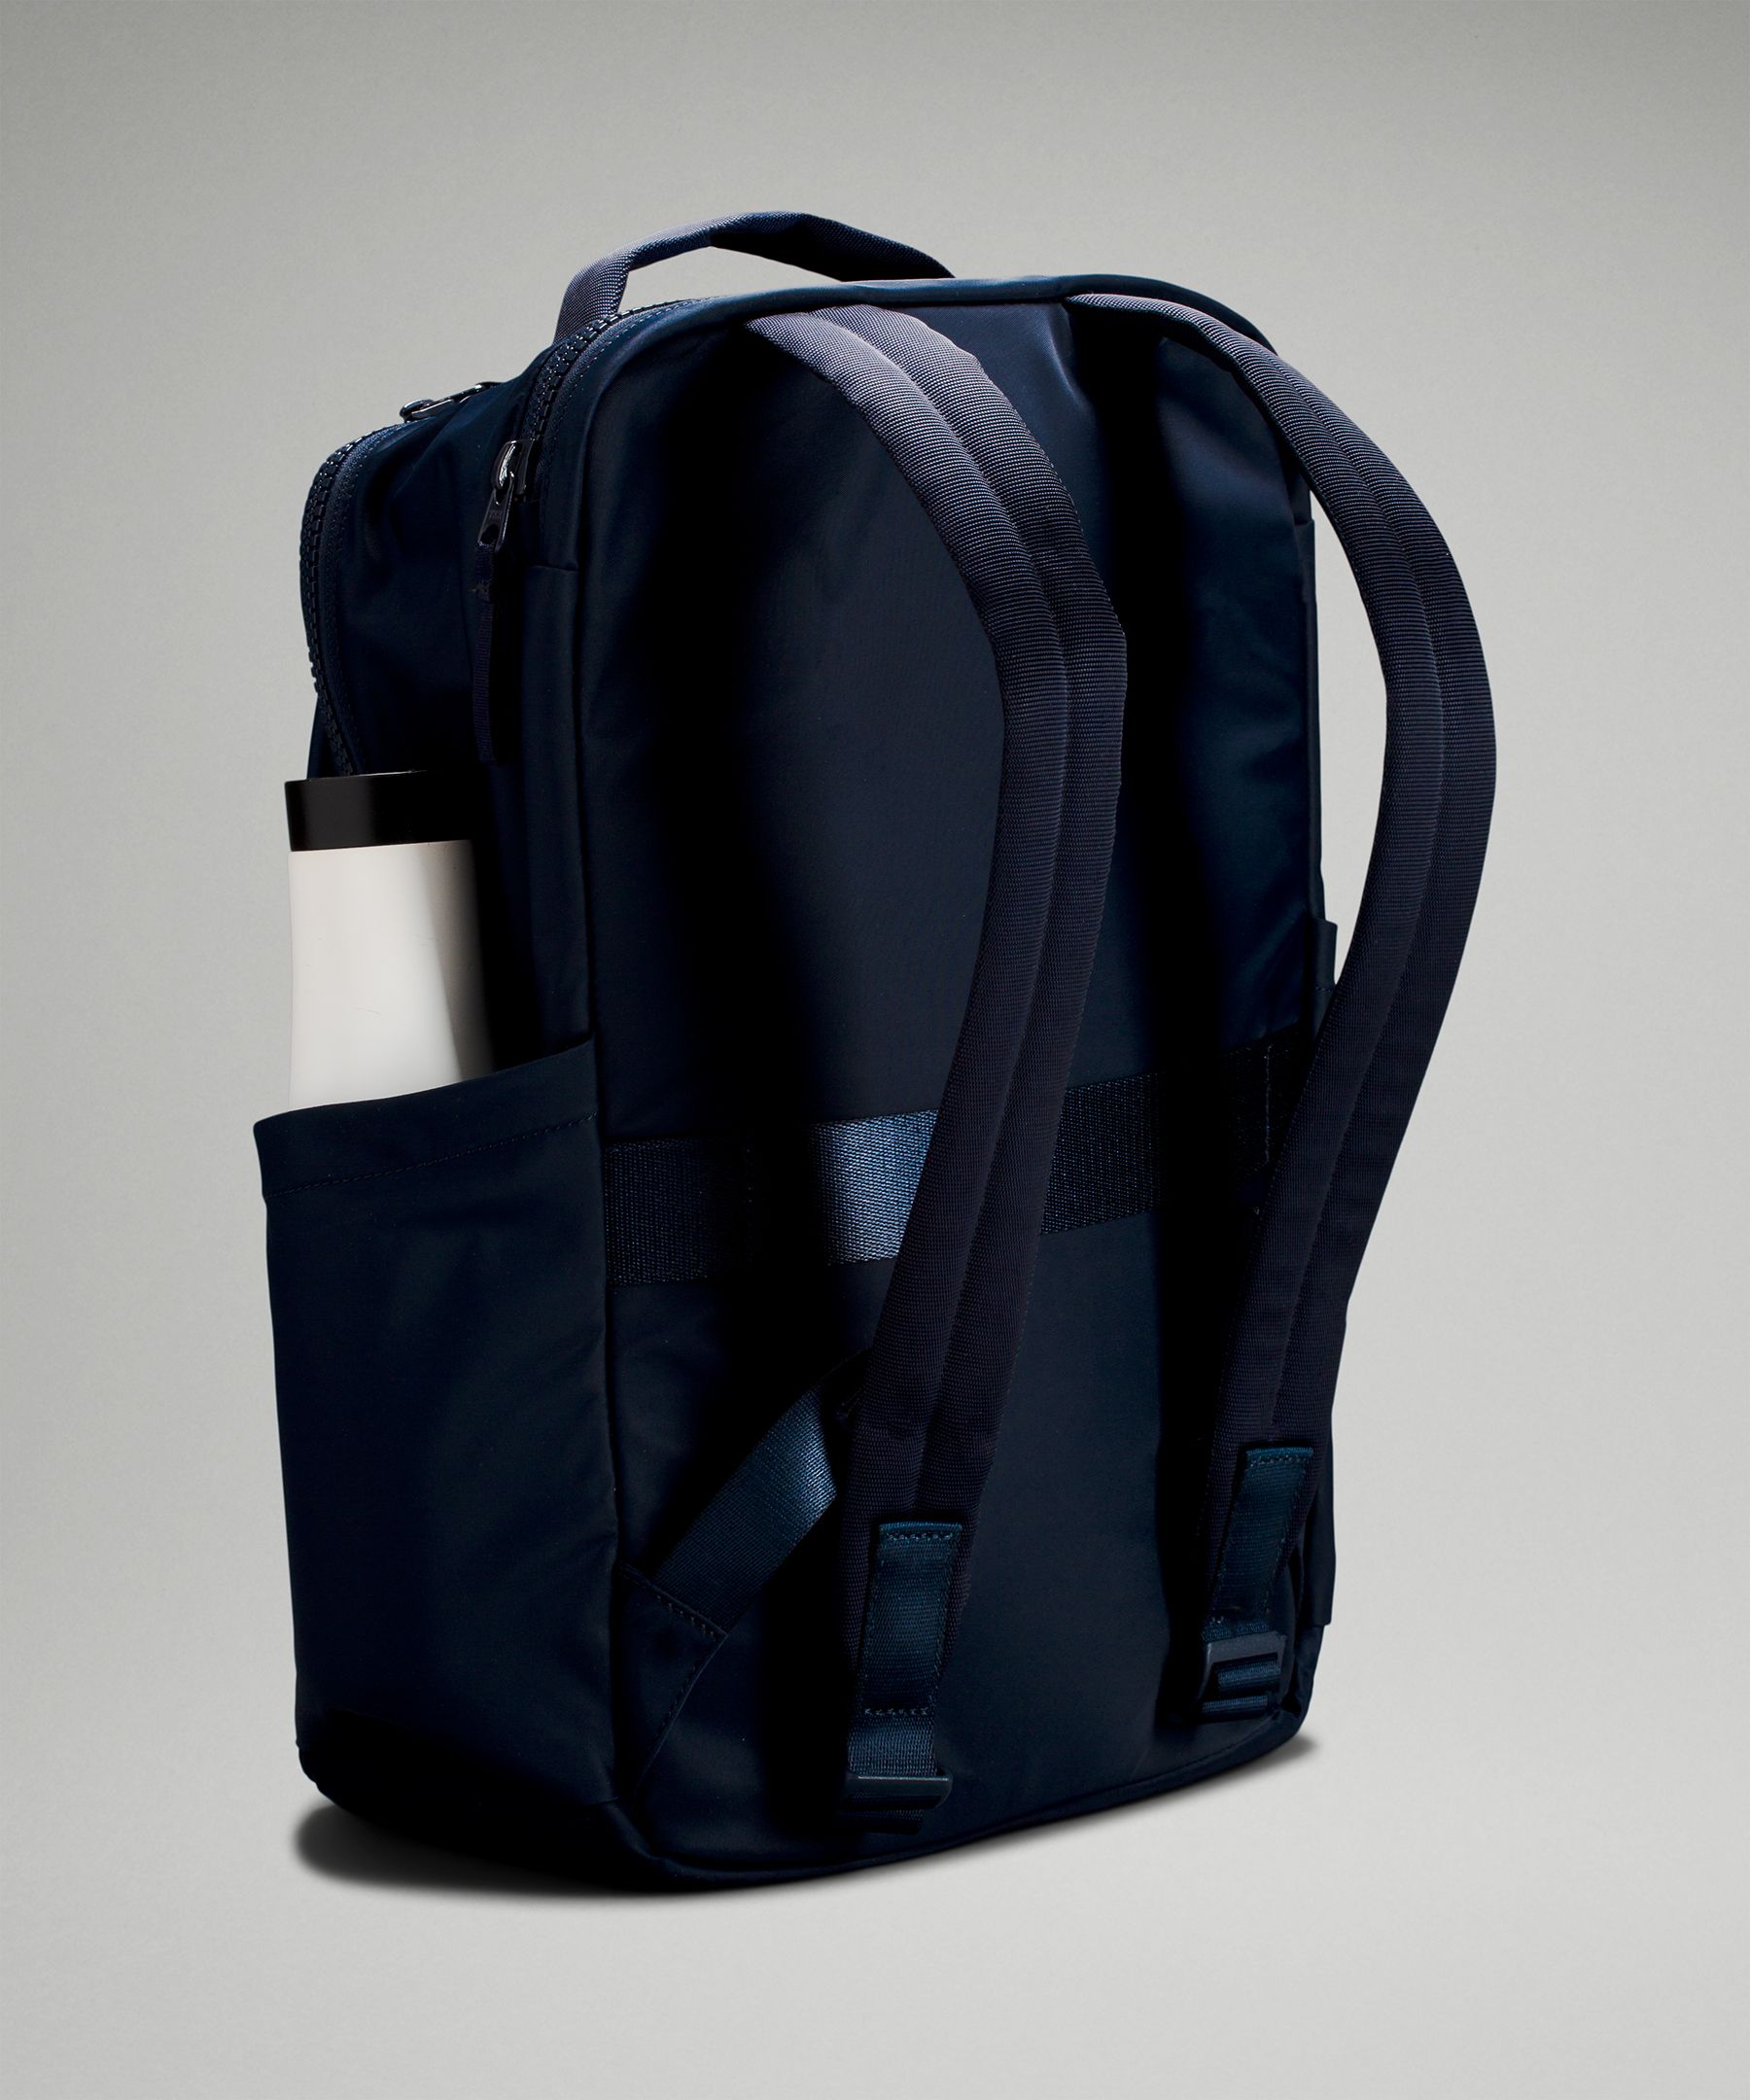 Lululemon Every day Backpack 2.0 23L (001)